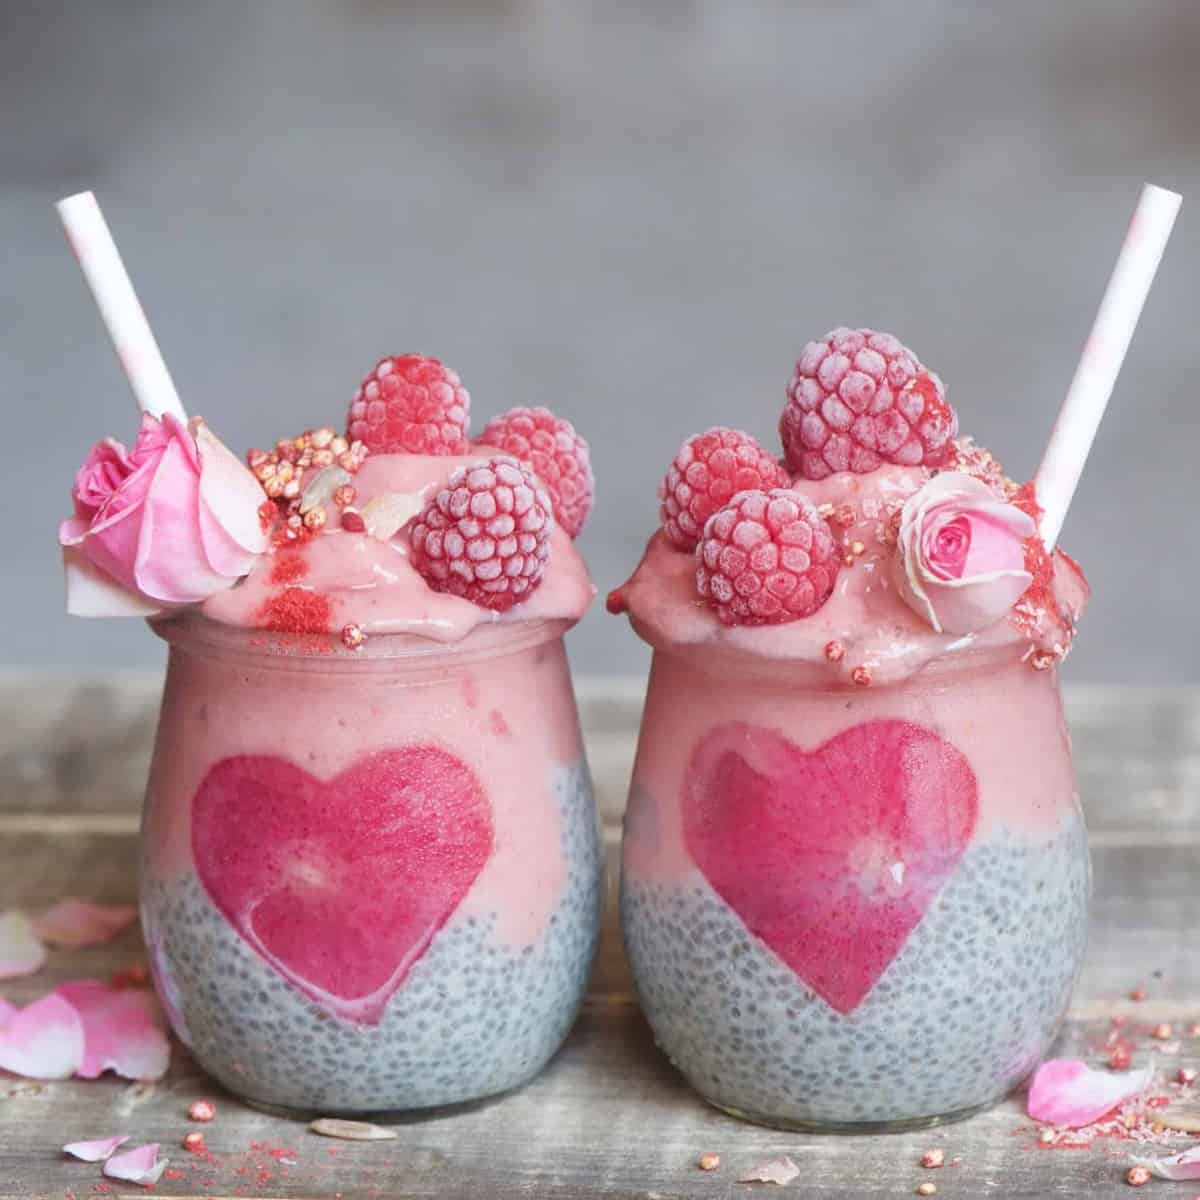 Two jars with chia pudding with pink yogurt decorated with raspberries and edible flowers 